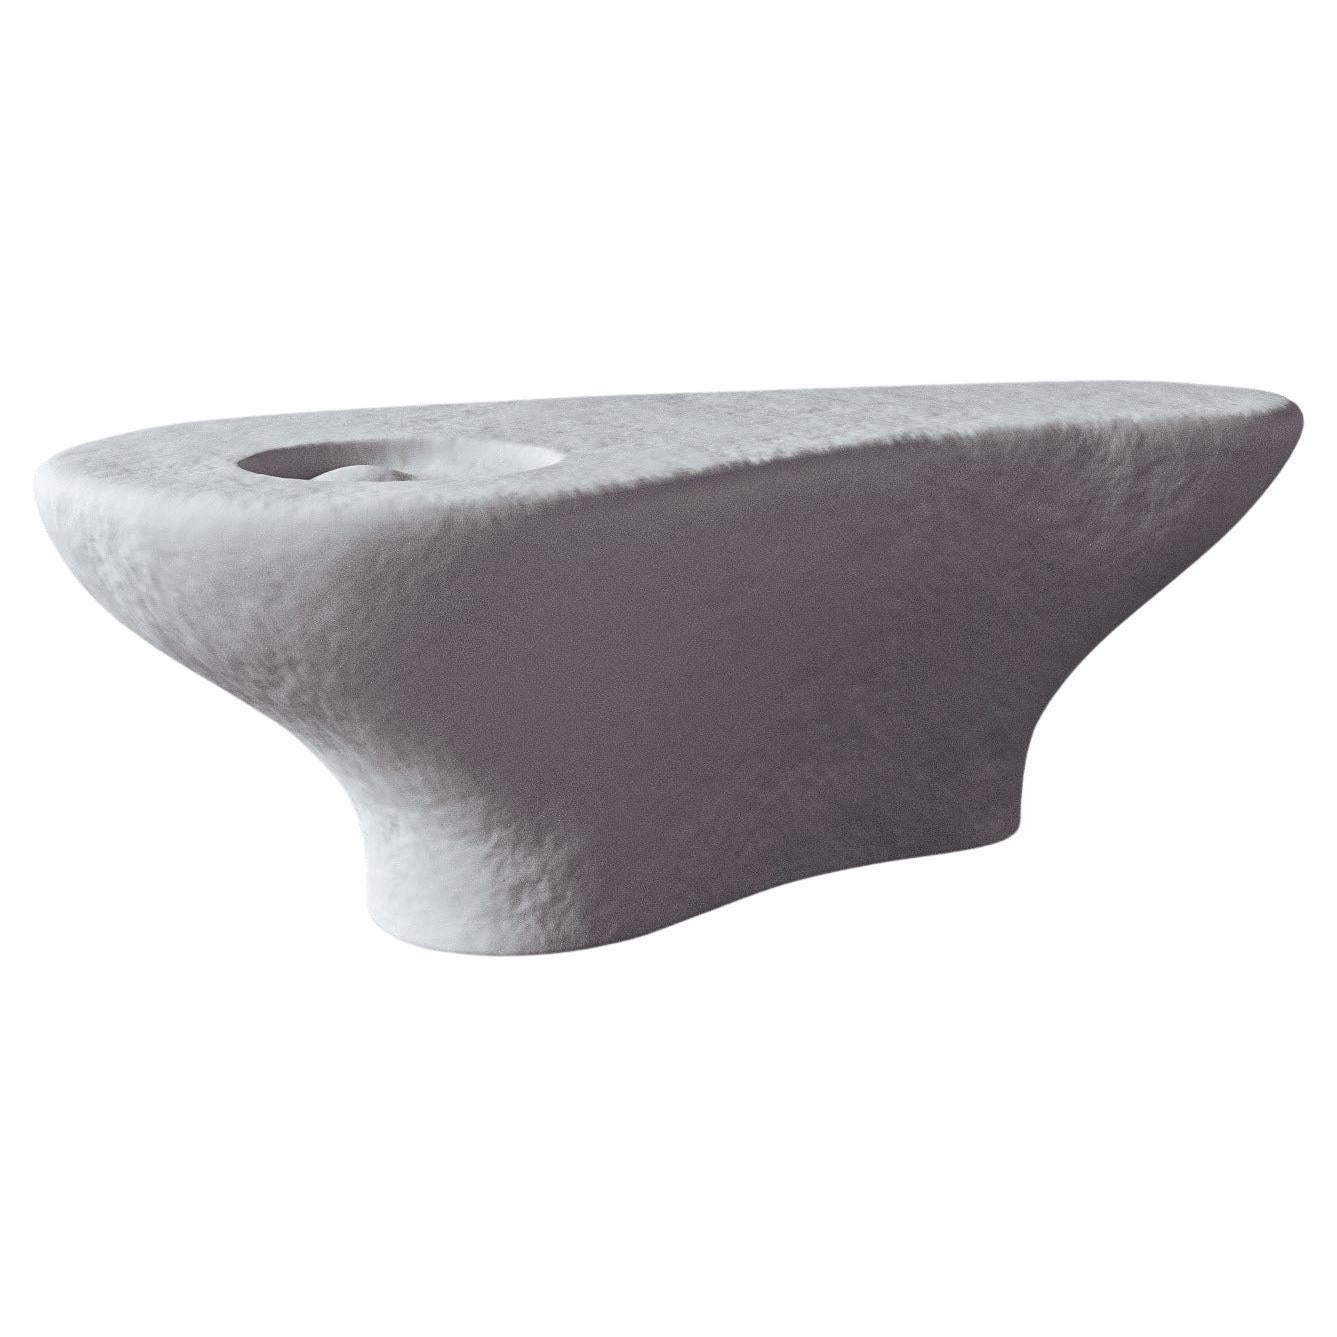 "Vence" Organic, Hand-Sculpted Plaster Accent Table by Christiane Lemieux